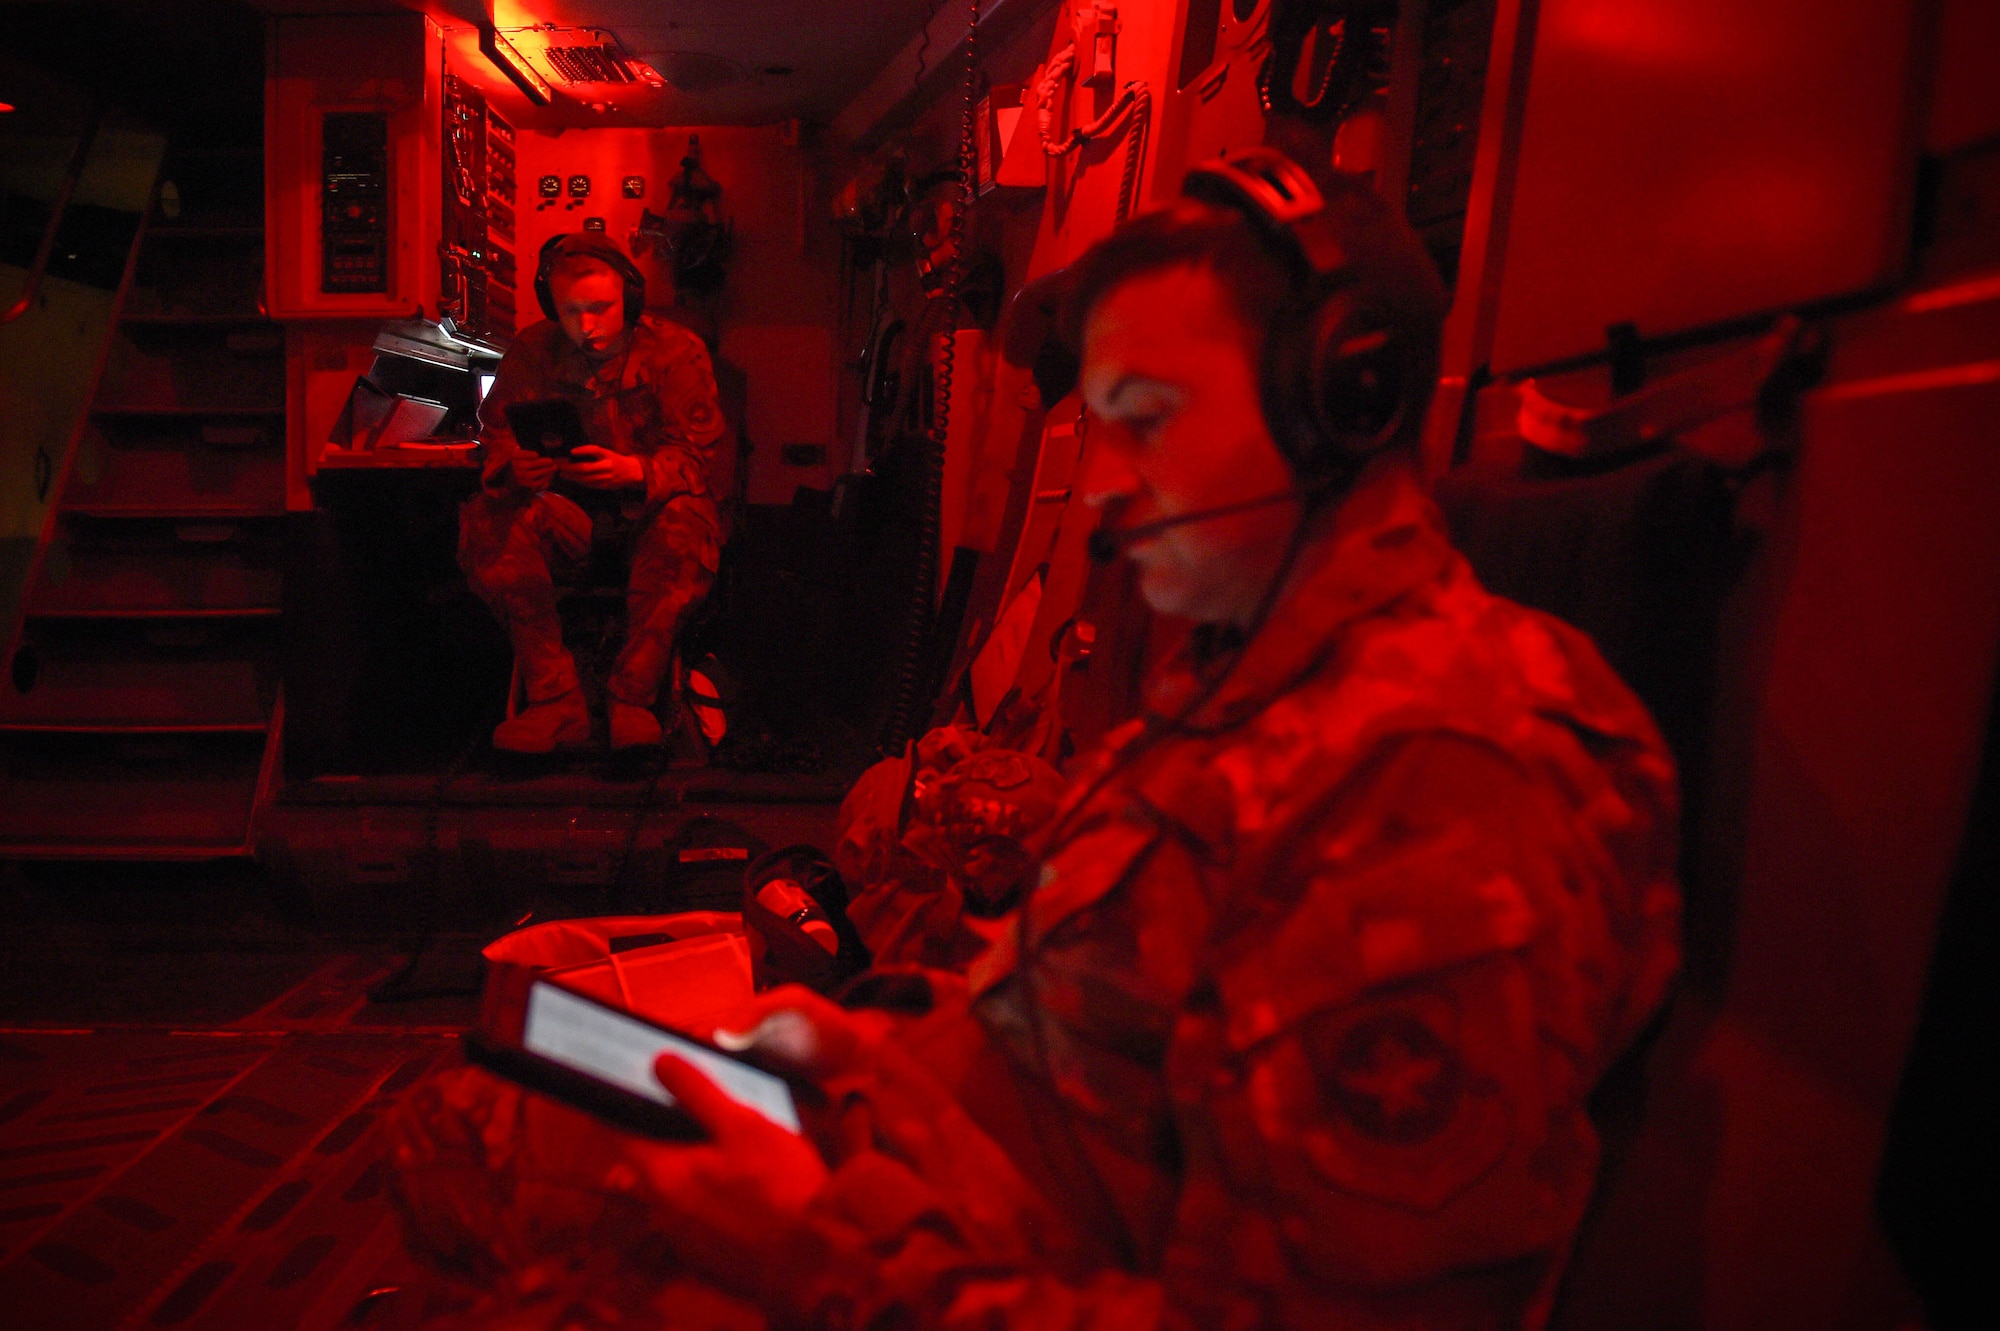 Airman 1st Class Kam Watt, left, and Master Sgt. Andrew Reilly, 4th Airlift Squadron loadmasters, review loadmaster Air Force Instructions (AFIs) aboard a C-17 Globemaster III in flight Dec. 18, 2019. Loadmasters don’t have career development courses (CDCs) like some Air Force career fields, instead, they rely primarily on the guidelines laid out in the AFIs and flight manuals. (U.S. Air Force photo by Airman 1st Class Mikayla Heineck)